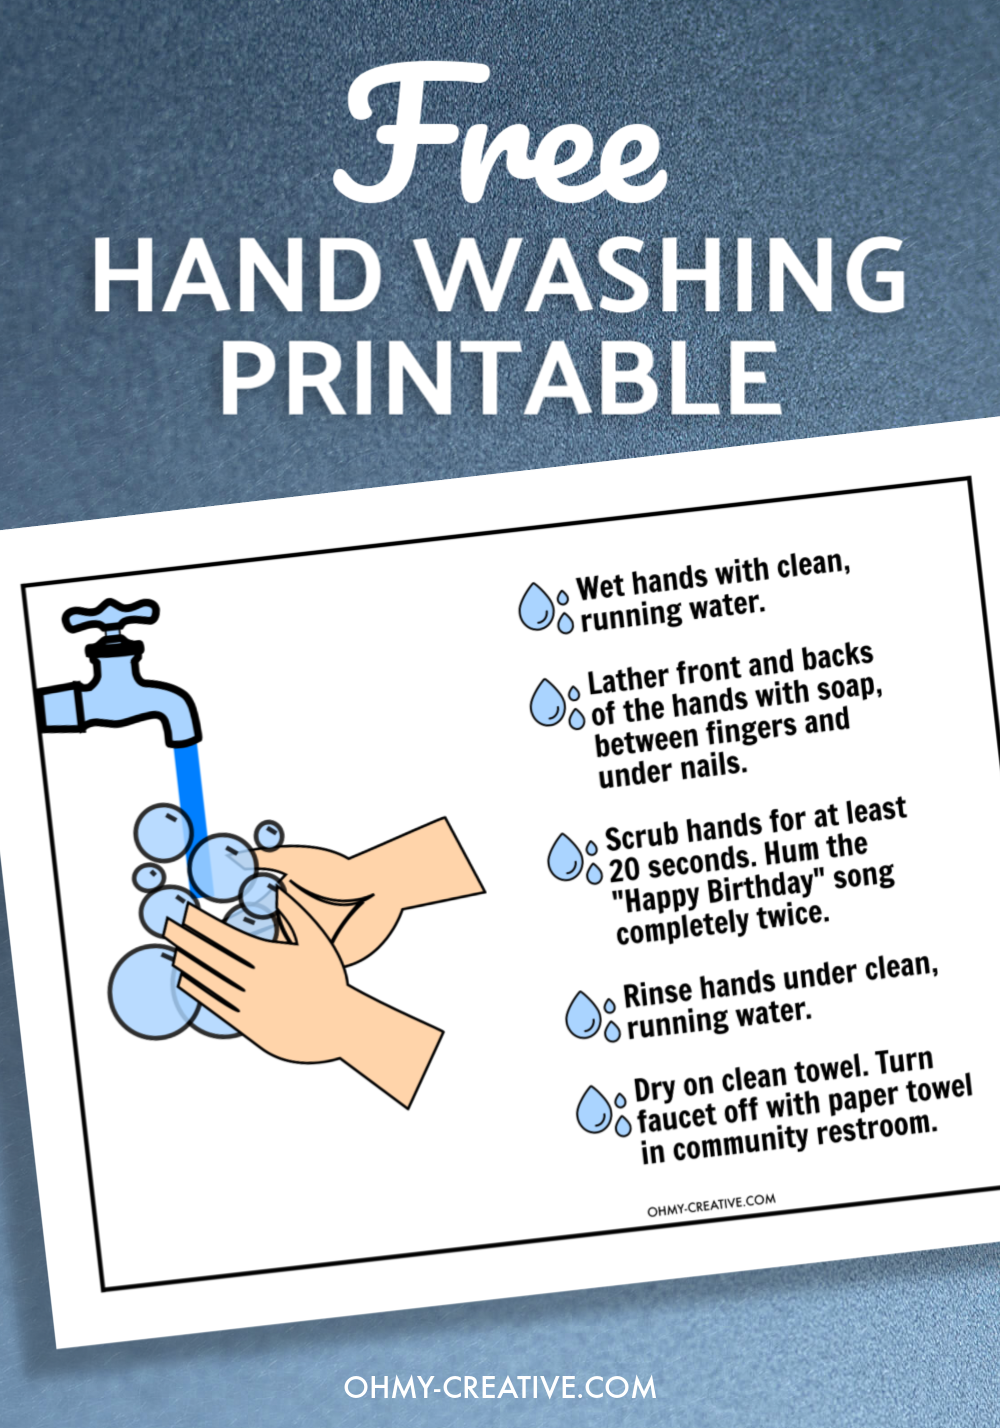 Hand washing printable with graphic of soapy hands under faucet and a list of hand washing instructions.